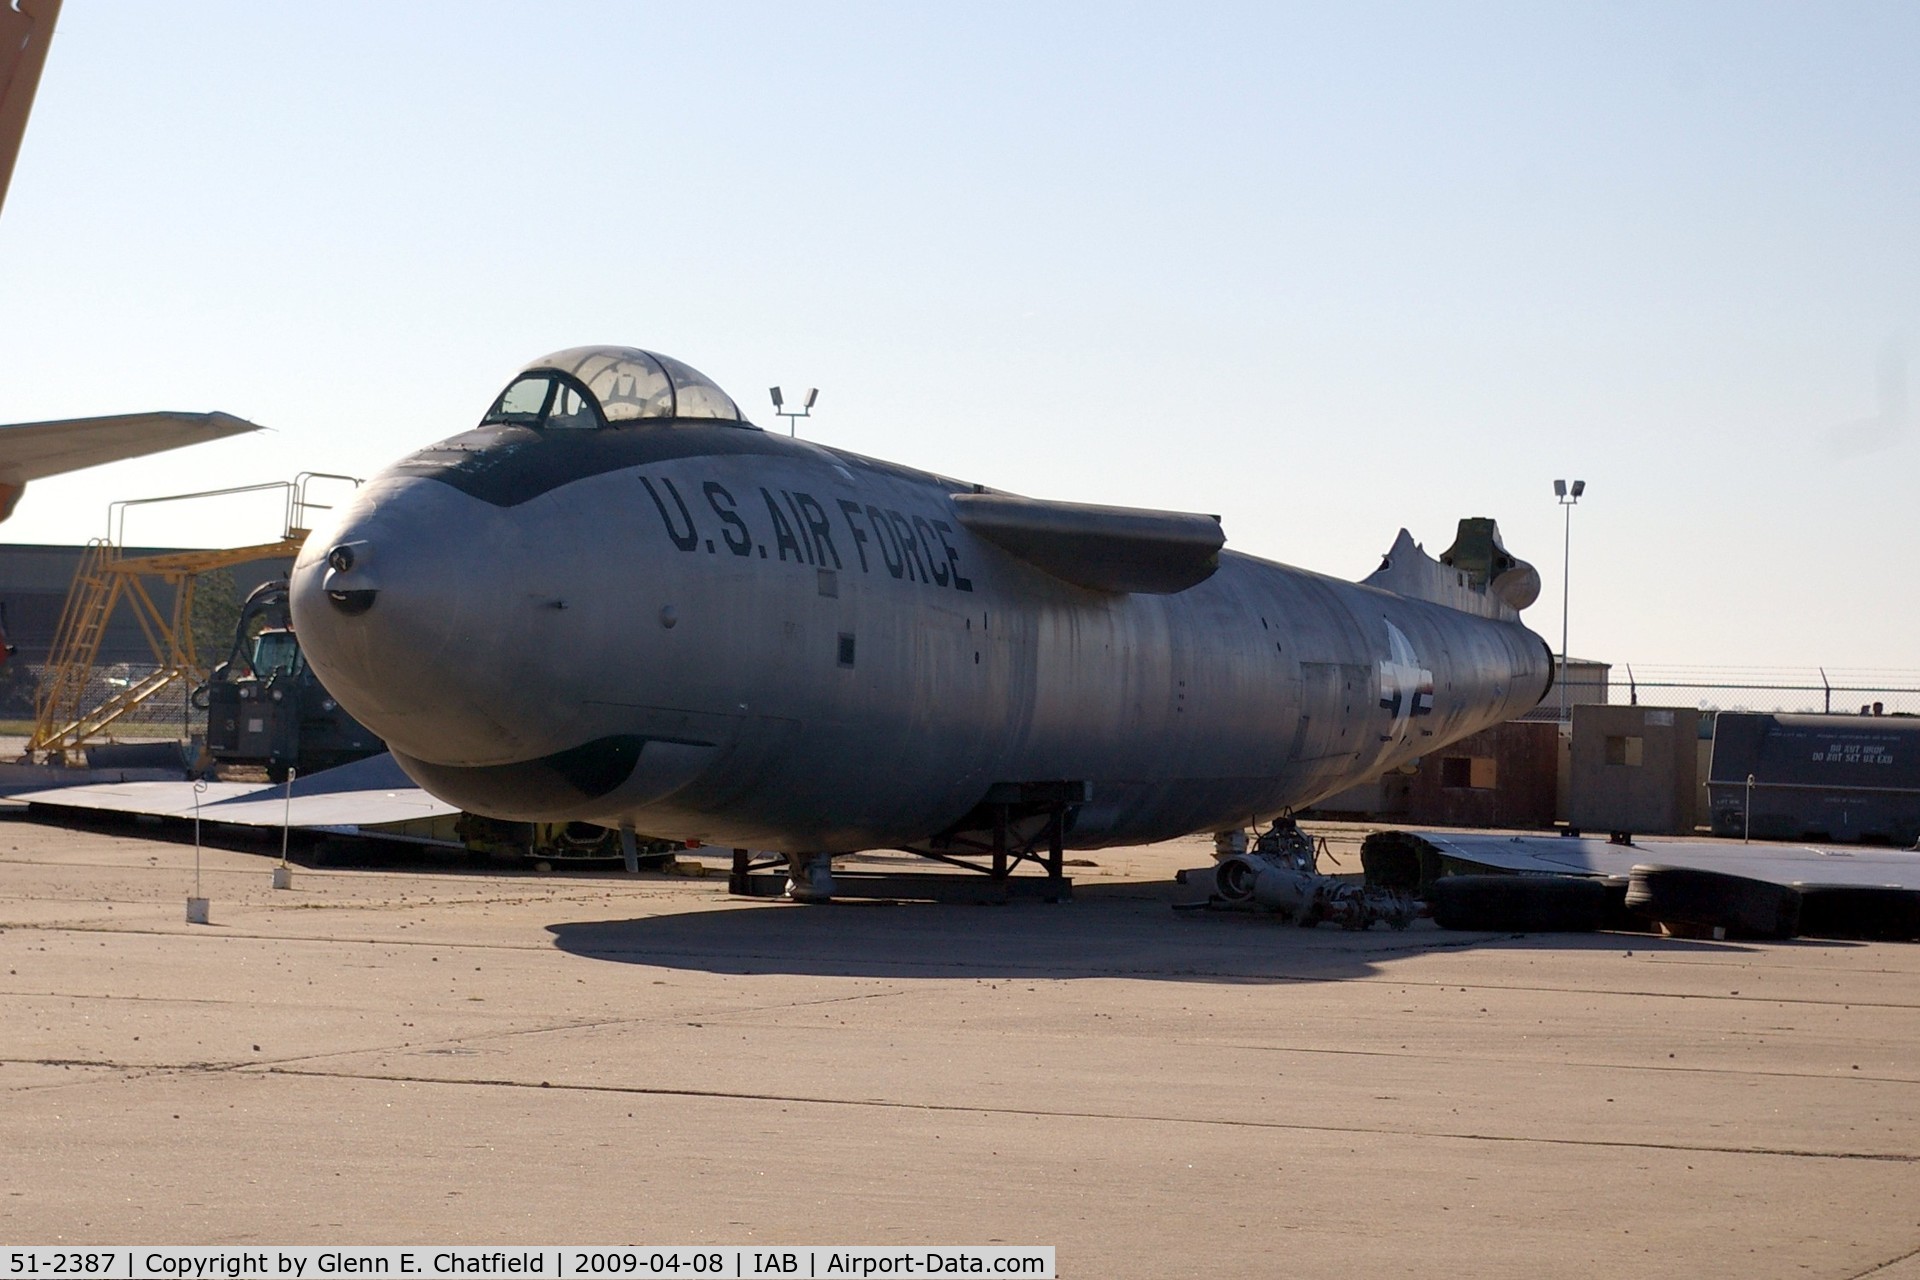 51-2387, 1951 Boeing WB-47E-55-BW Stratojet C/N 450440, At the Kansas Aviation Museum, moved from the Oklahoma City fairgrounds